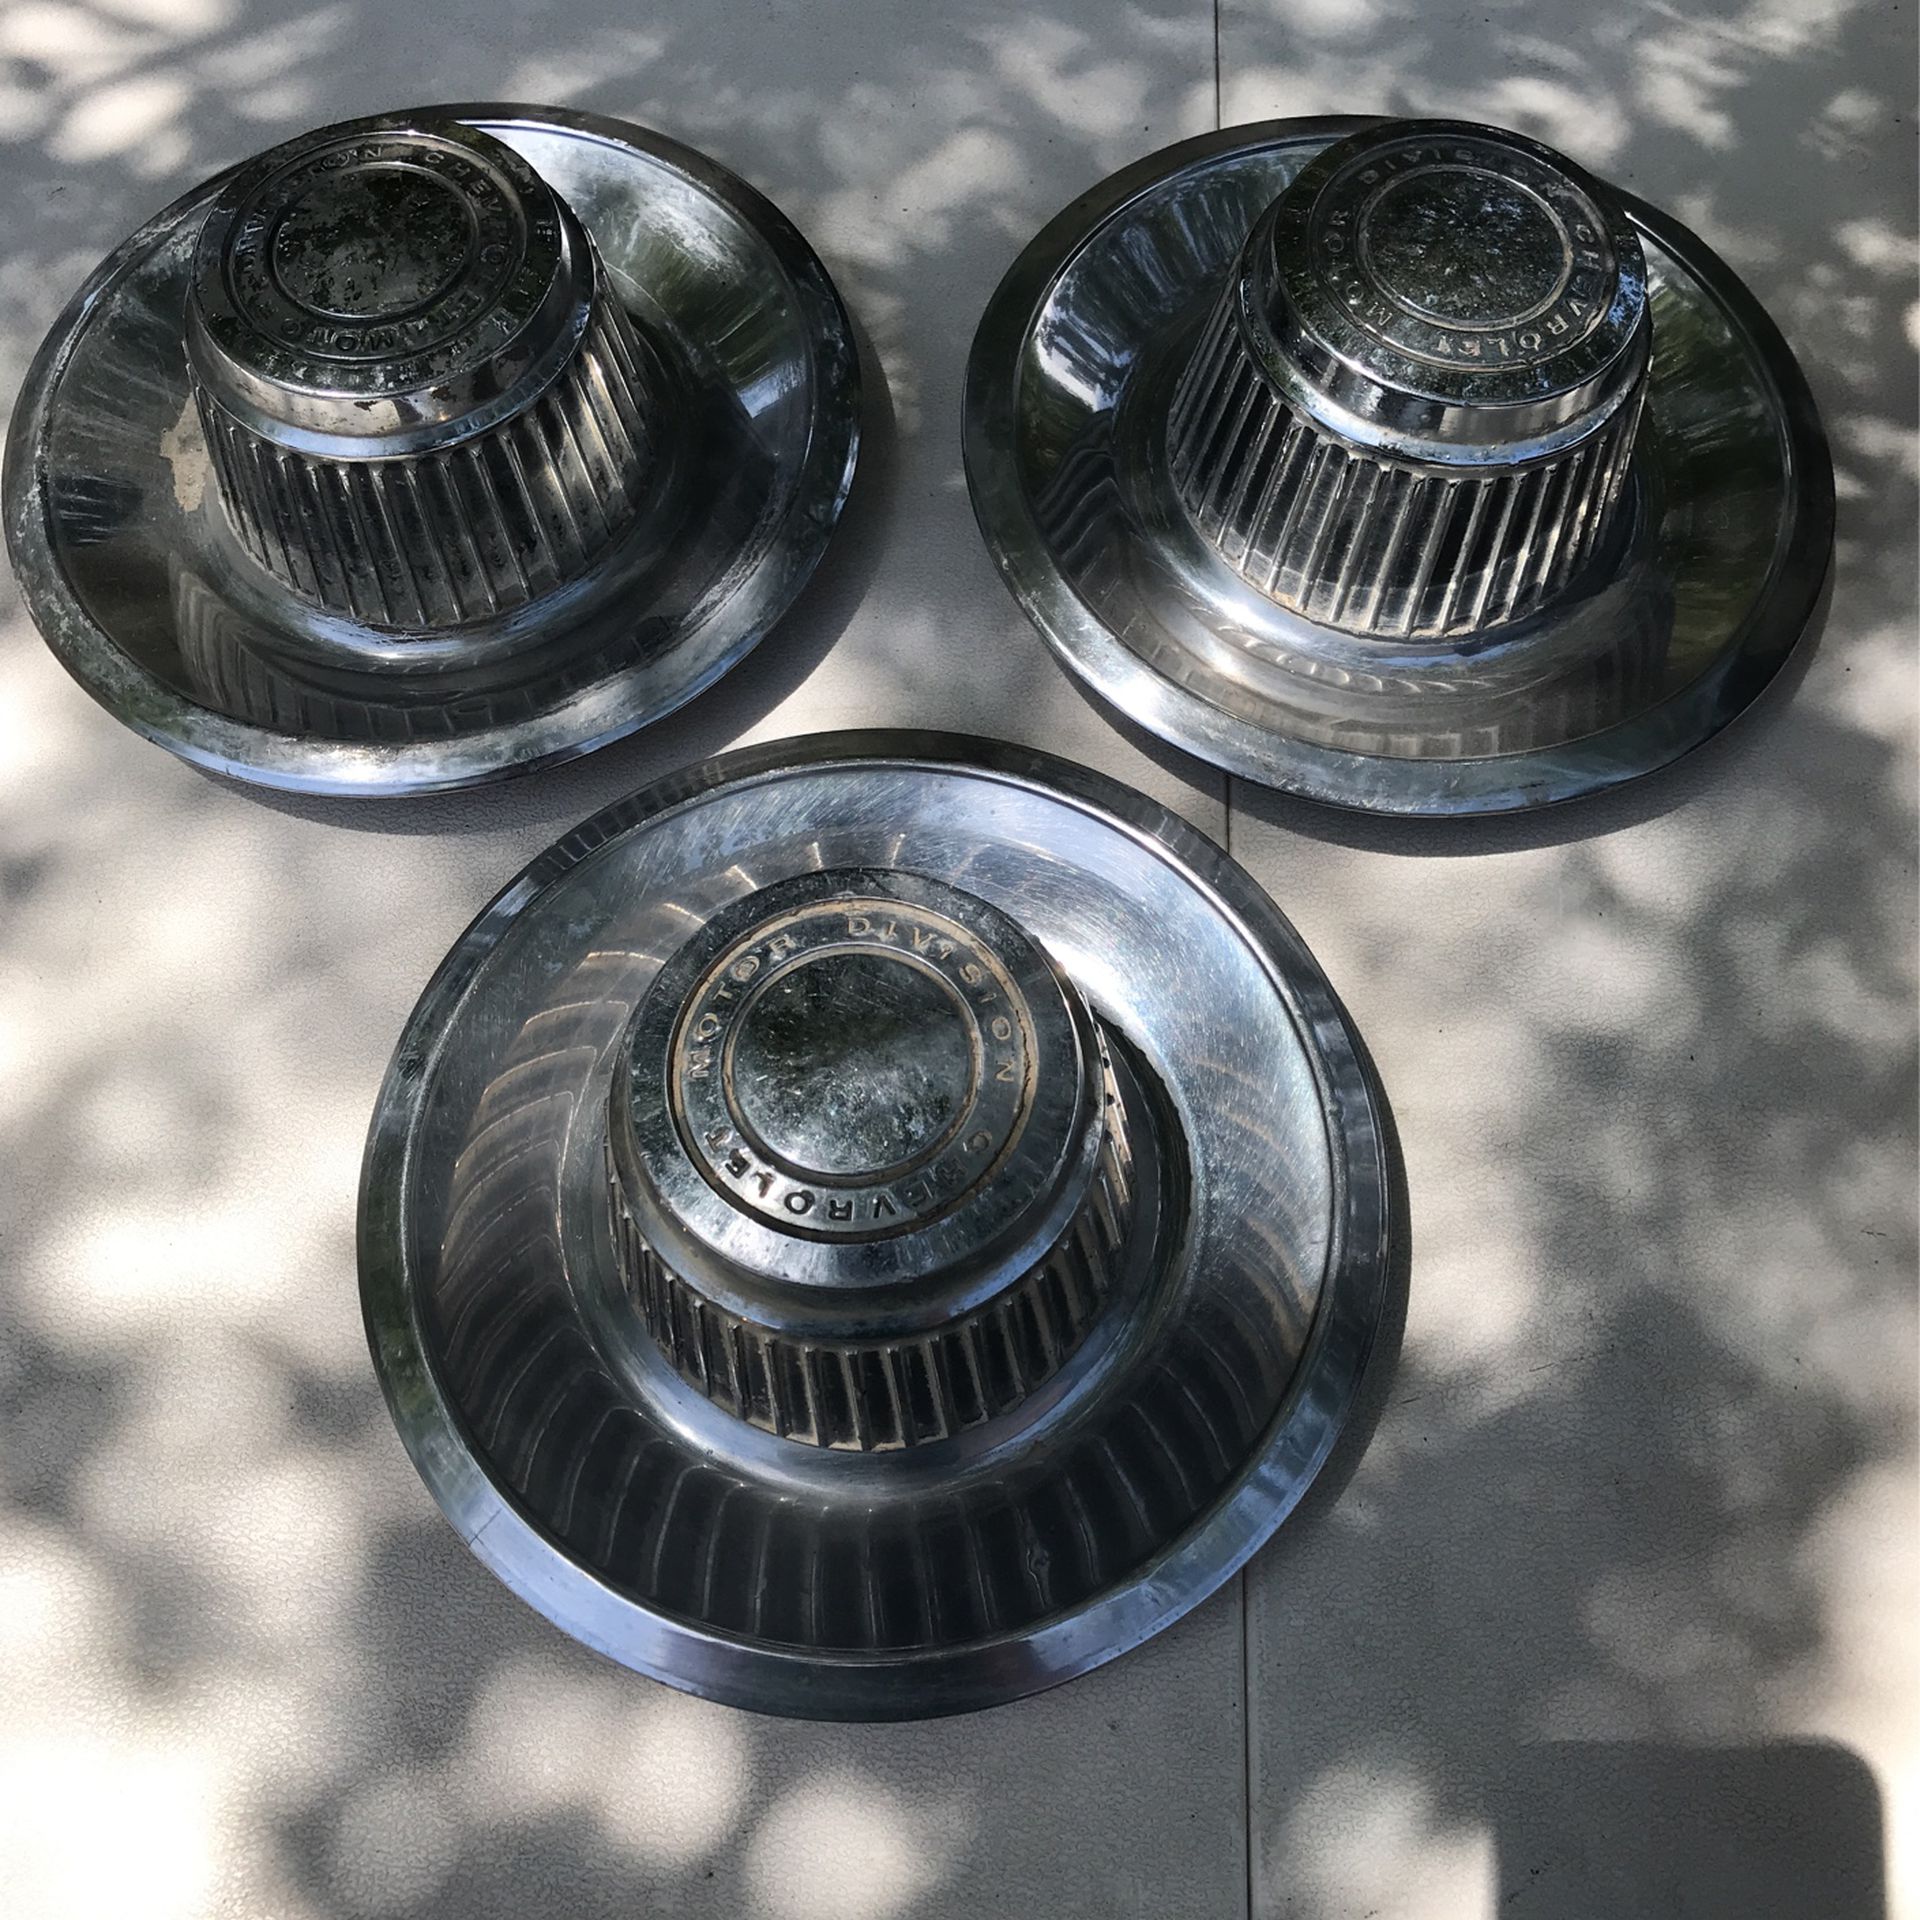 Obs Hub Caps For Chevy Rim Vintage Only Have 3